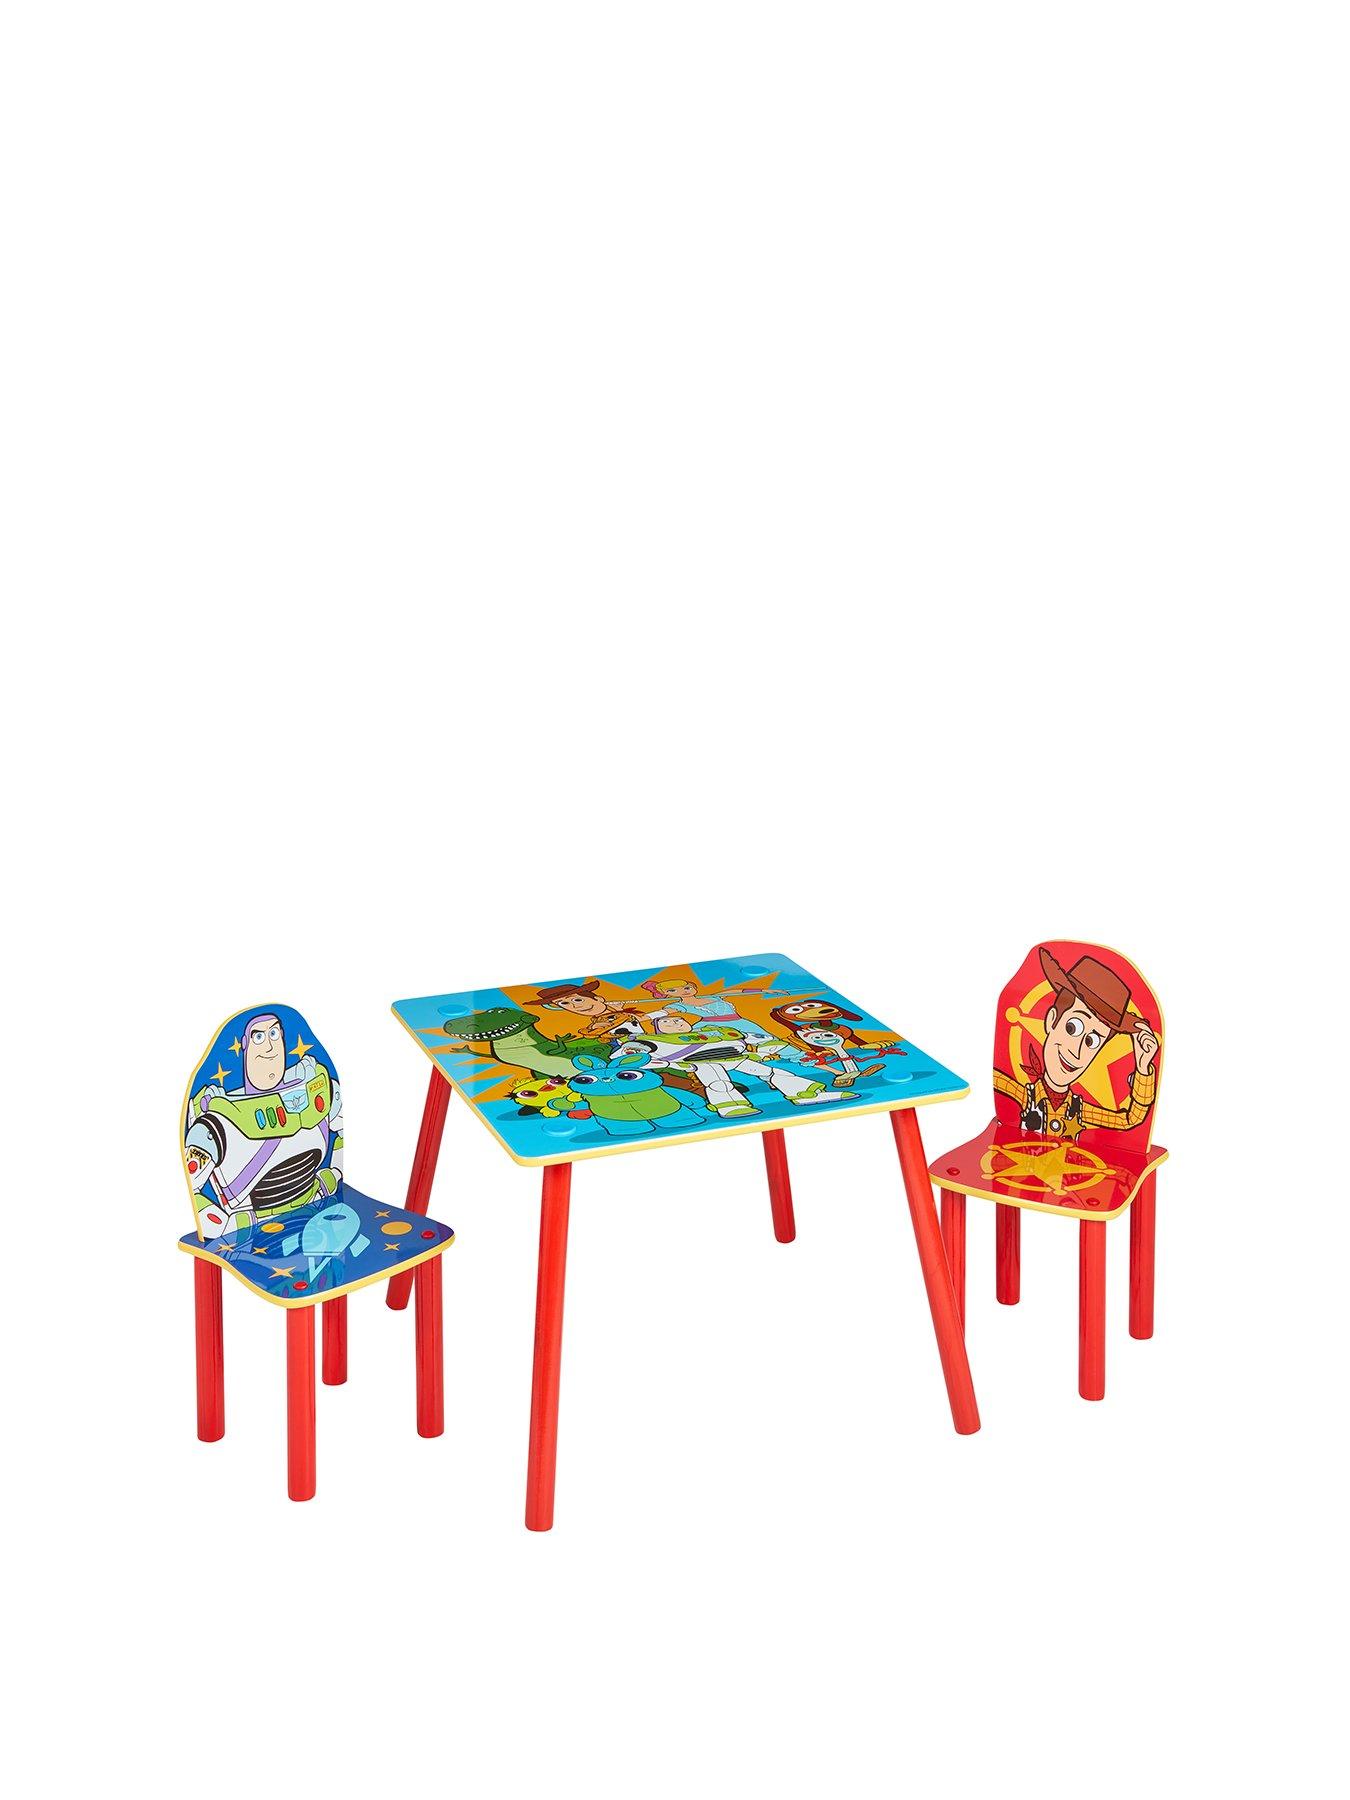 4 Kids Table And 2 Chairs Set By Hellohome